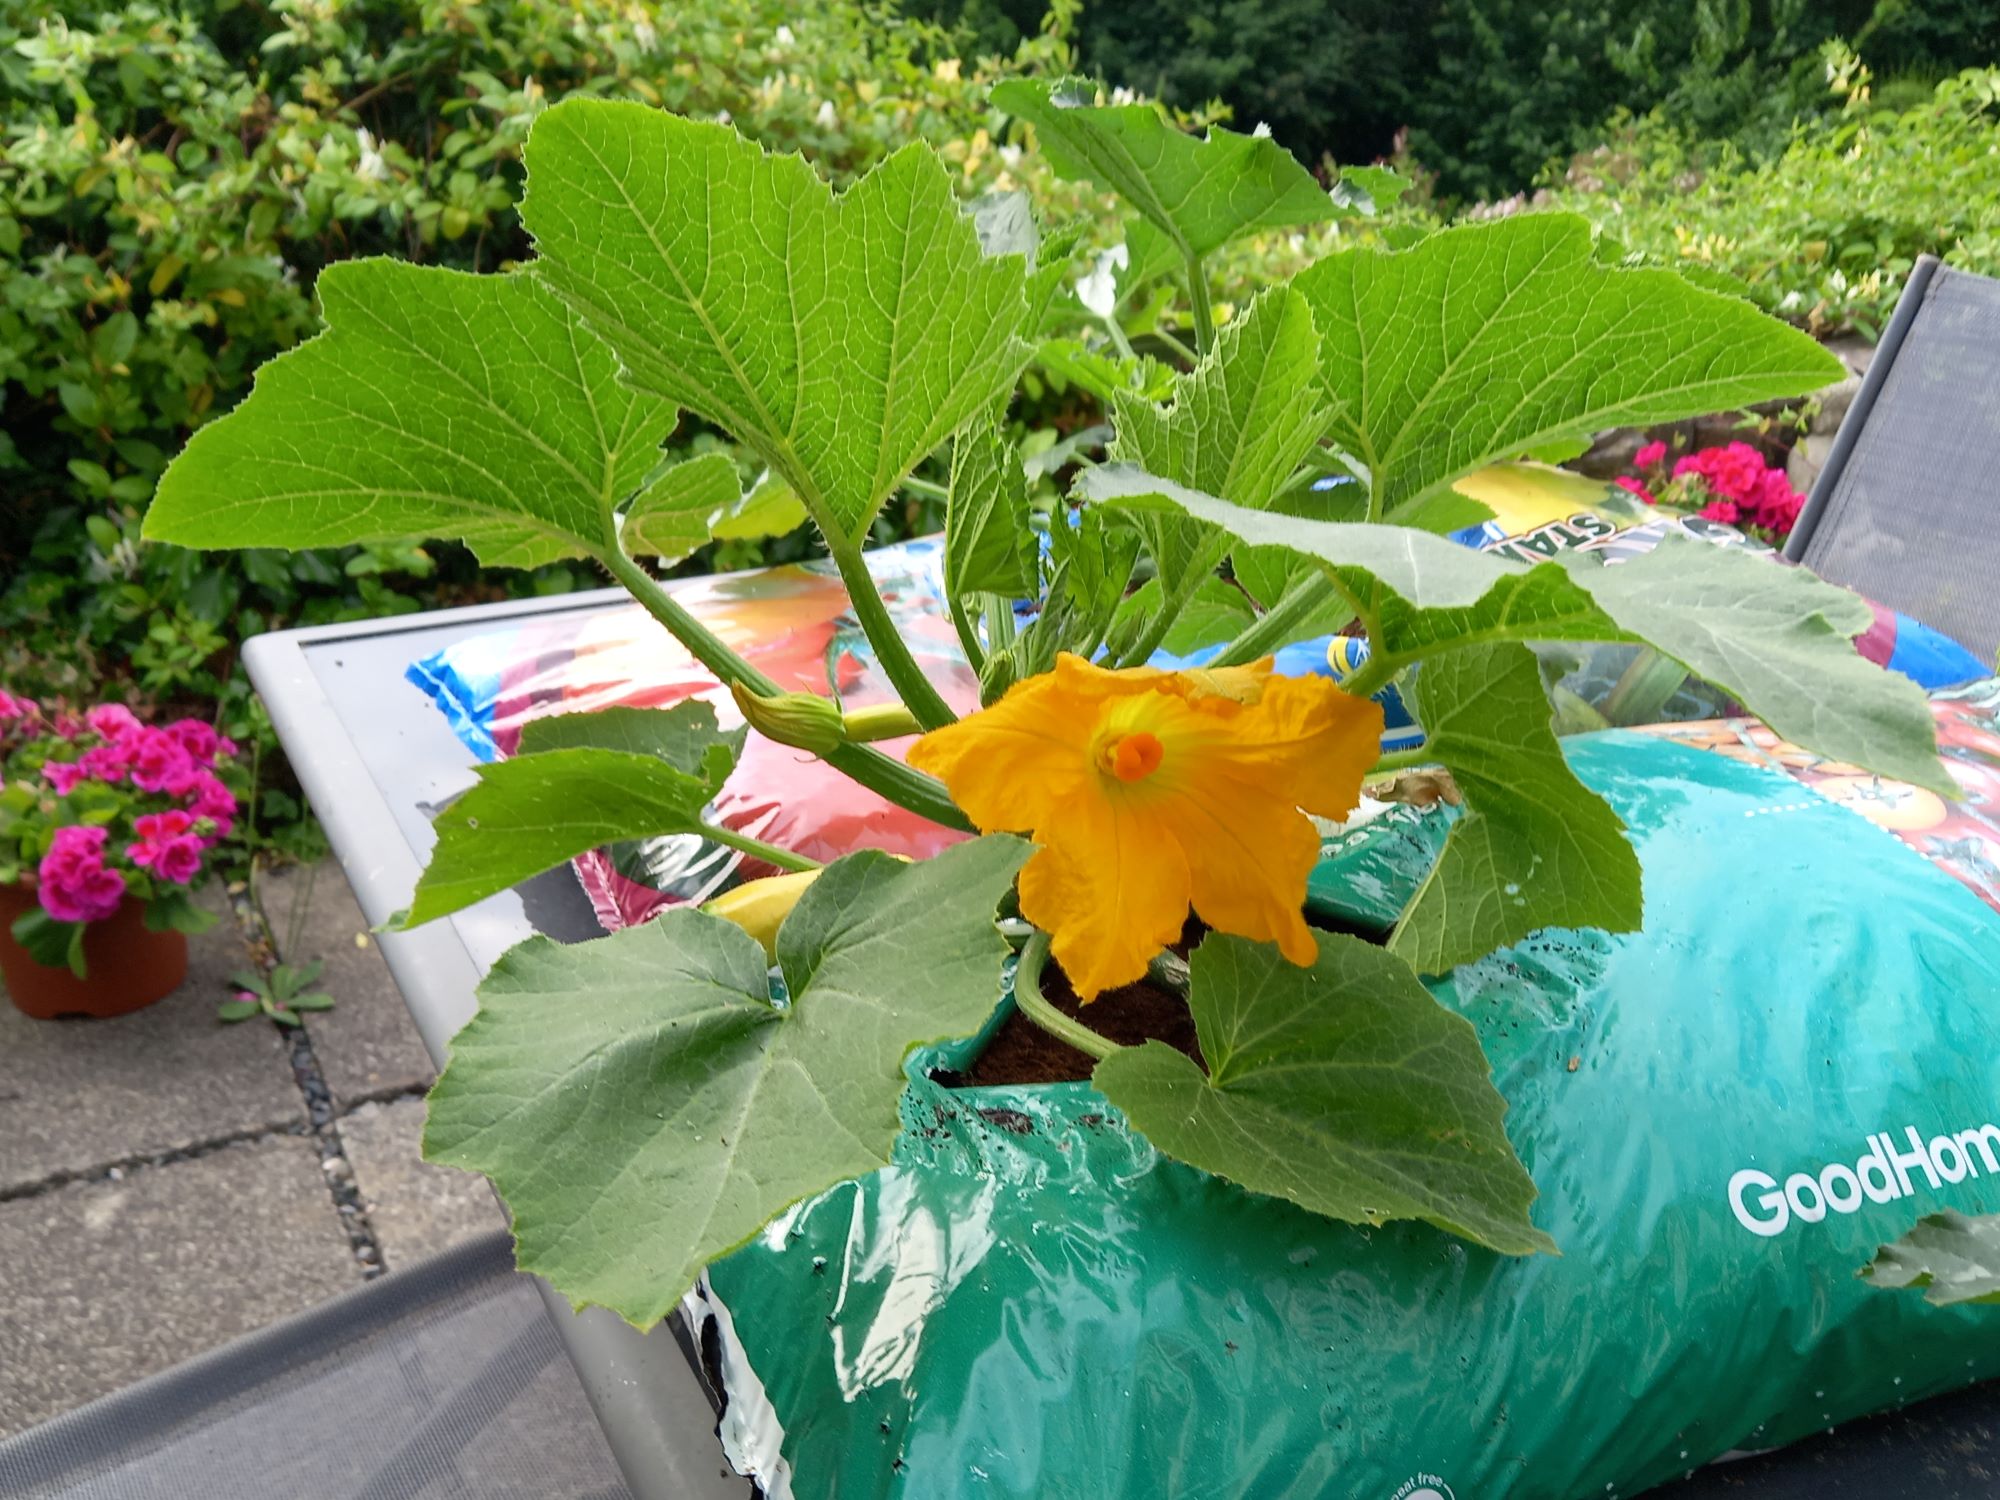 Our courgette plants